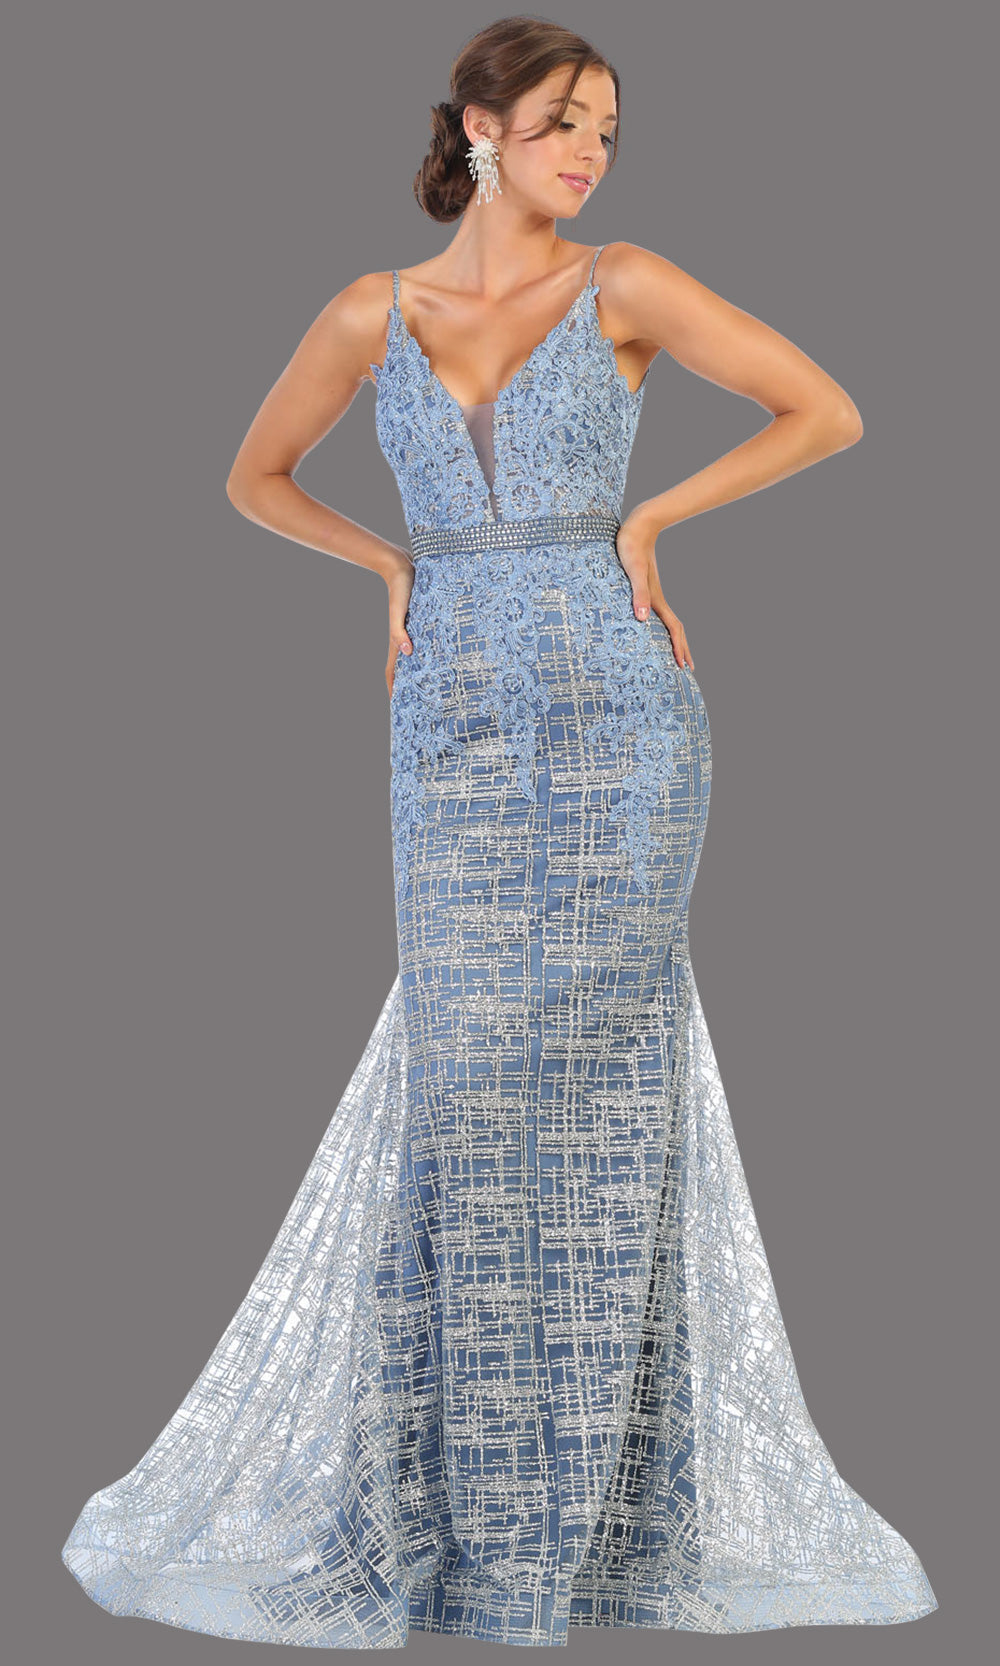 Mayqueen RQ7803 long dusty blue v neck sexy fitted sequin lace dress w/wide straps. Full length dusty blue gown is perfect for  enagagement/e-shoot dress, formal wedding guest, indowestern gown, evening party dress, prom, bridesmaid. Plus sizes avail.jpg